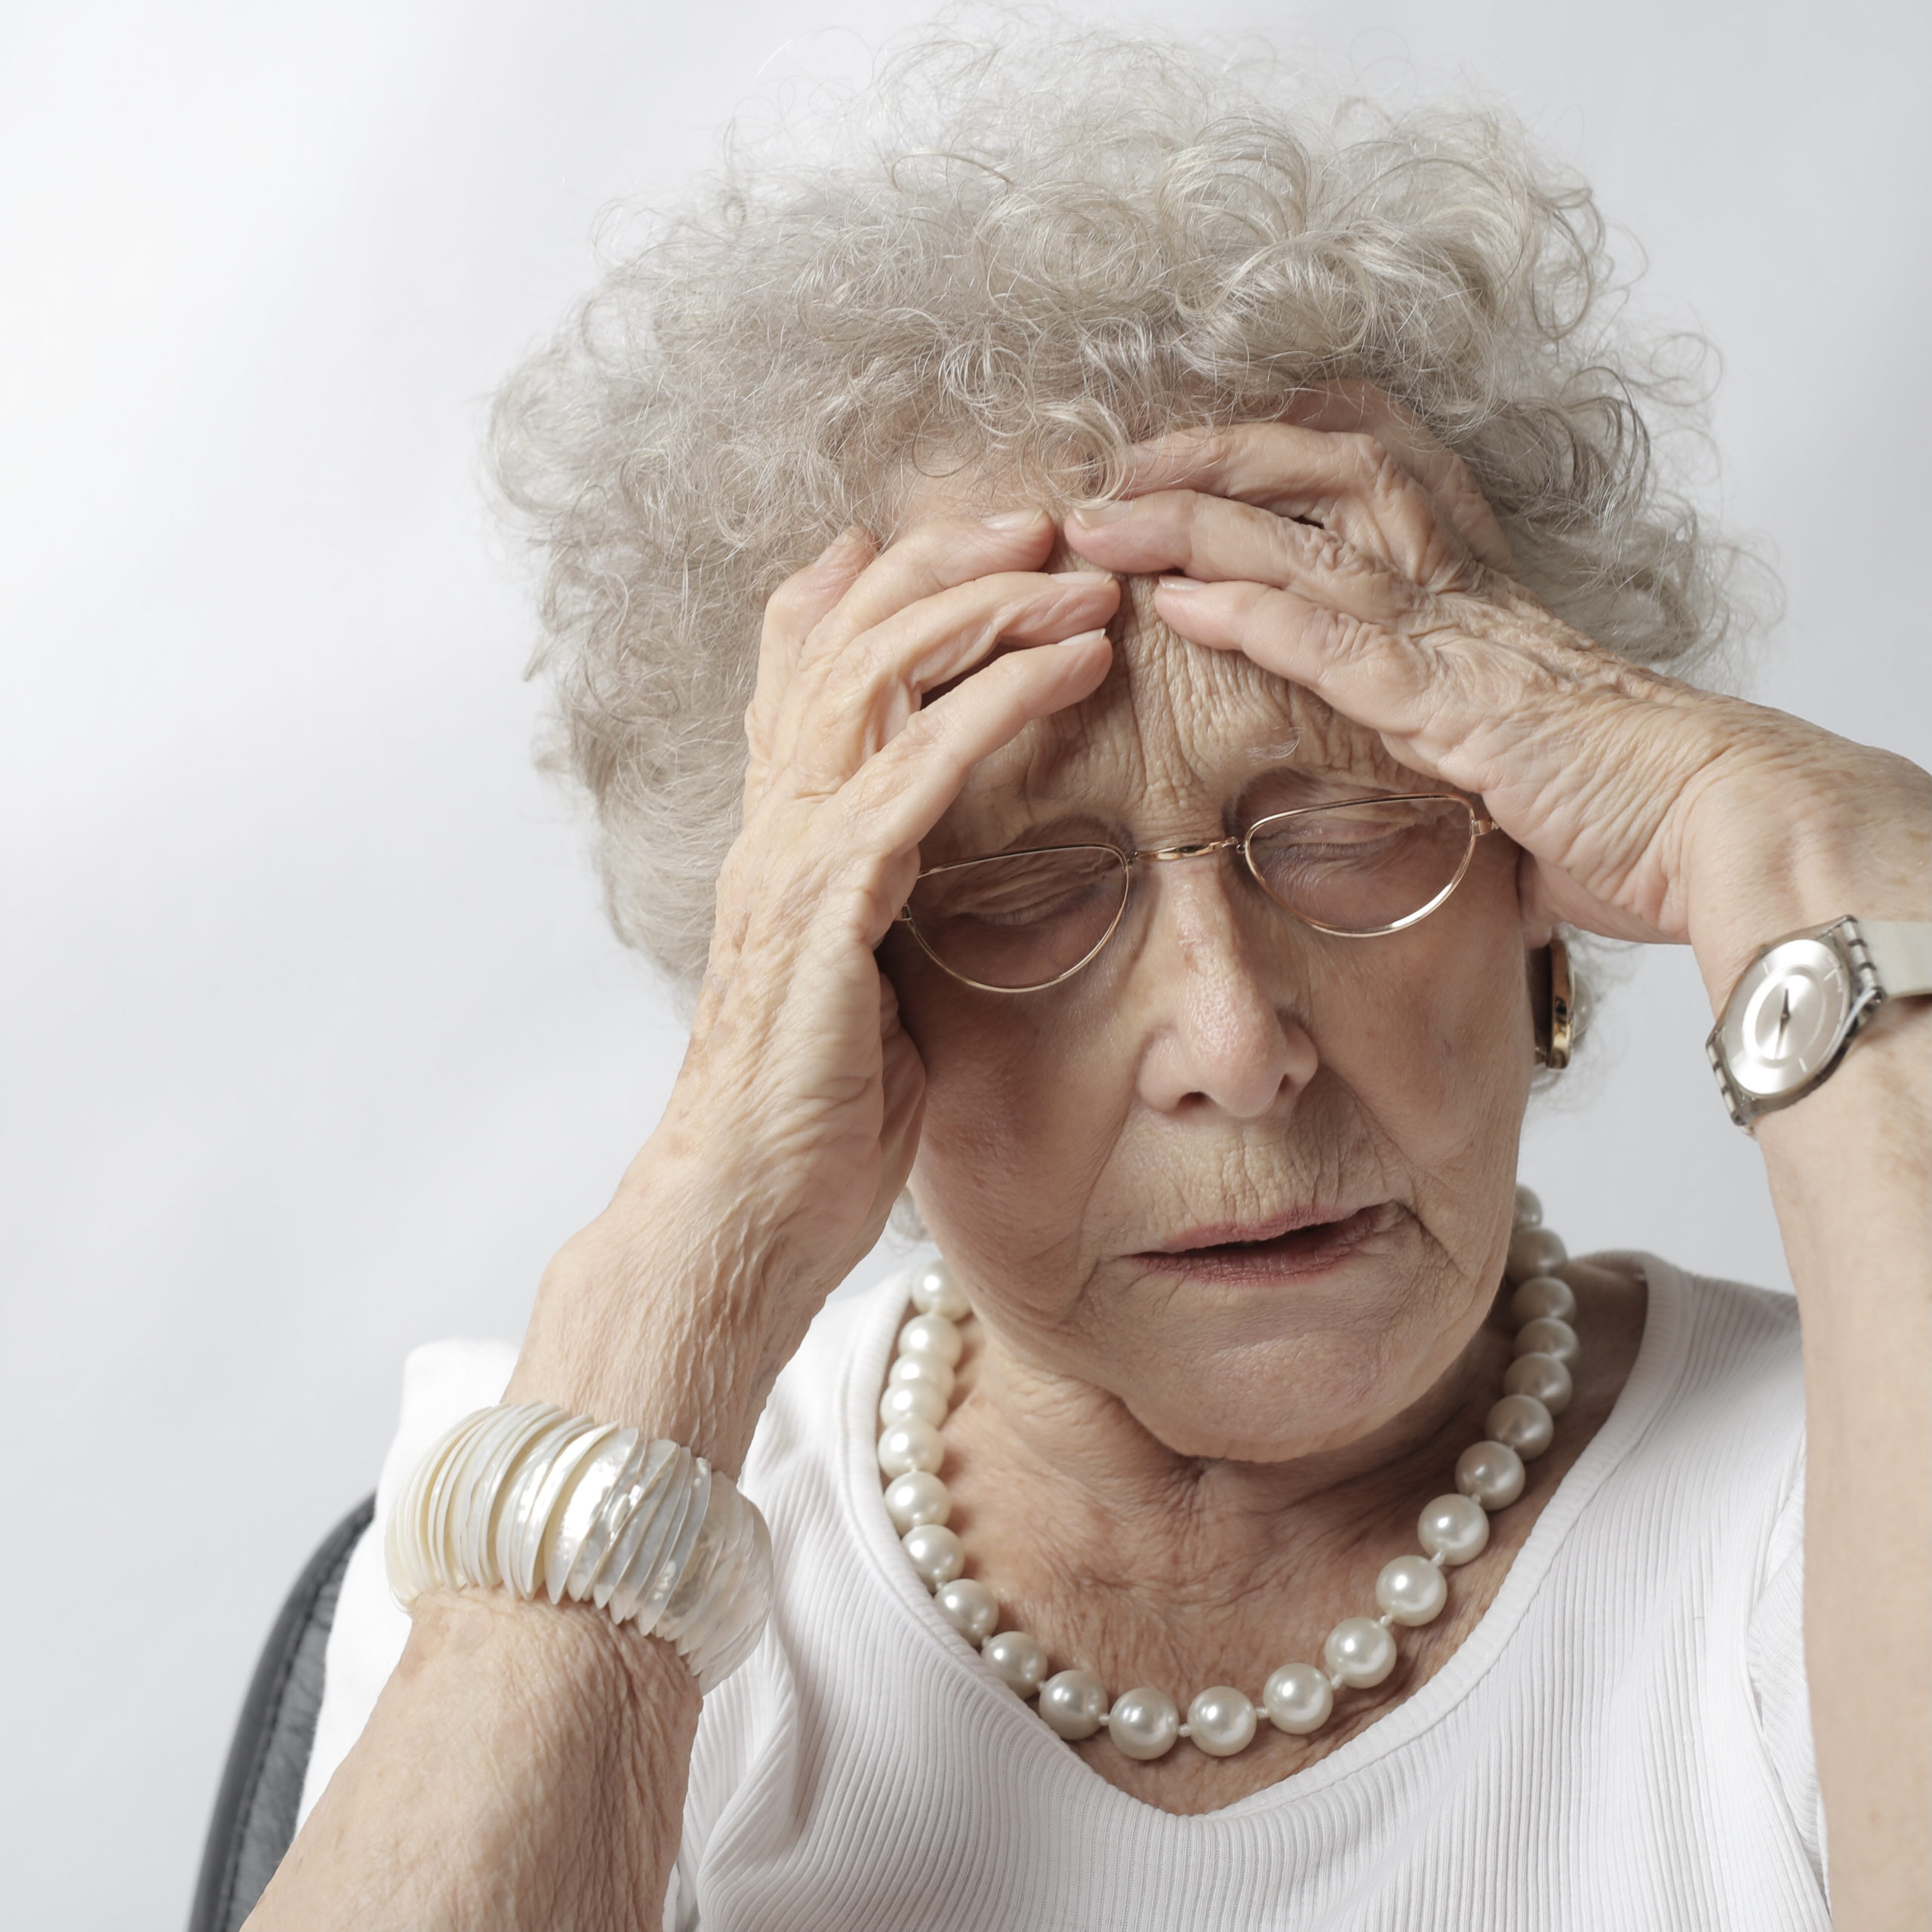 old woman with her head in her hands looking worried